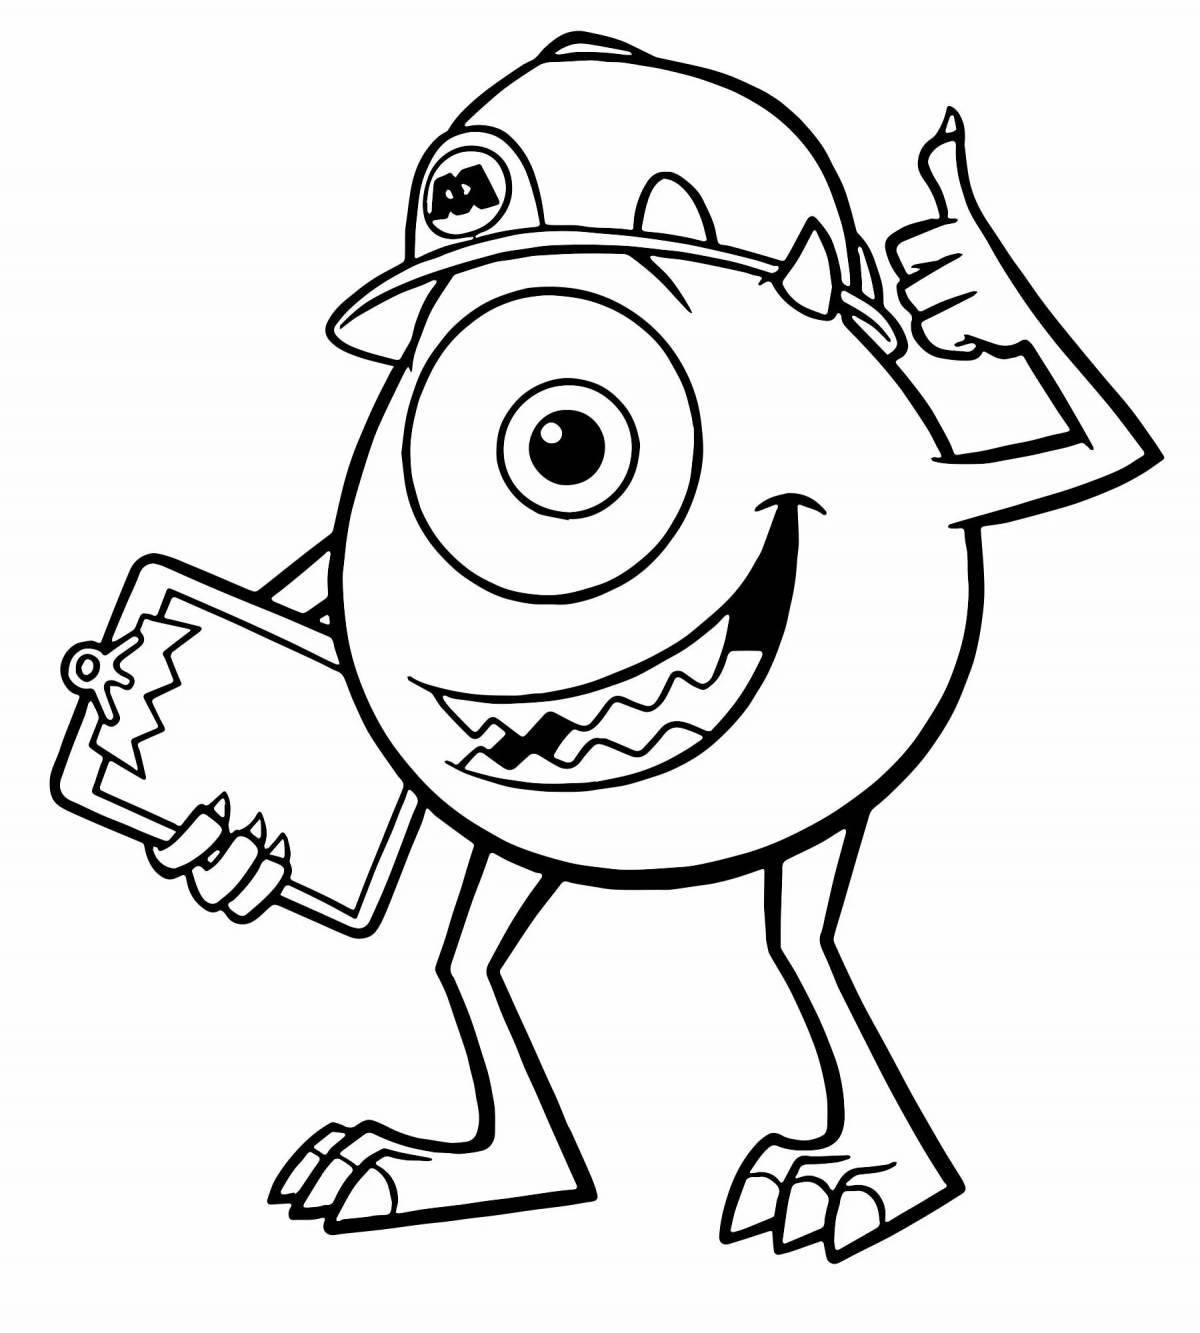 Creative monsters corporation coloring pages for kids